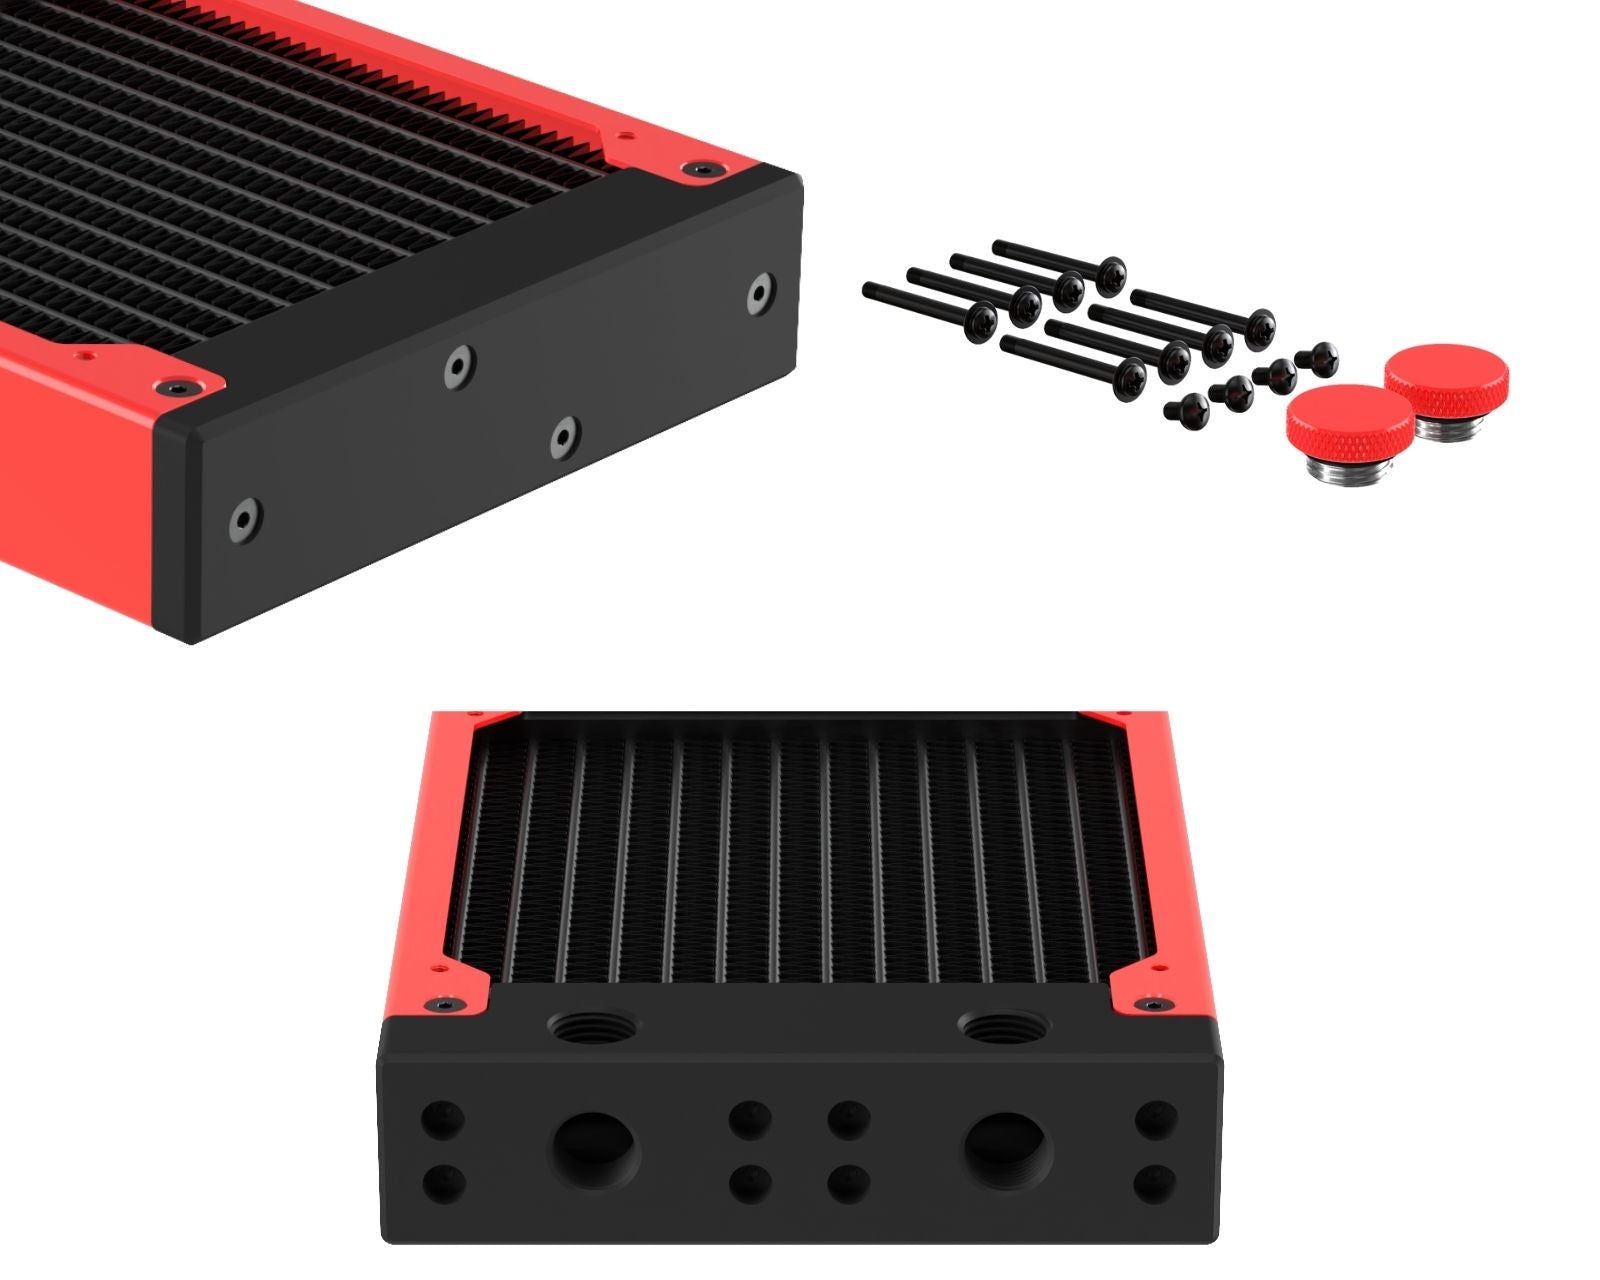 PrimoChill 240SL (30mm) EXIMO Modular Radiator, Black POM, 2x120mm, Dual Fan (R-SL-BK24) Available in 20+ Colors, Assembled in USA and Custom Watercooling Loop Ready - UV Red